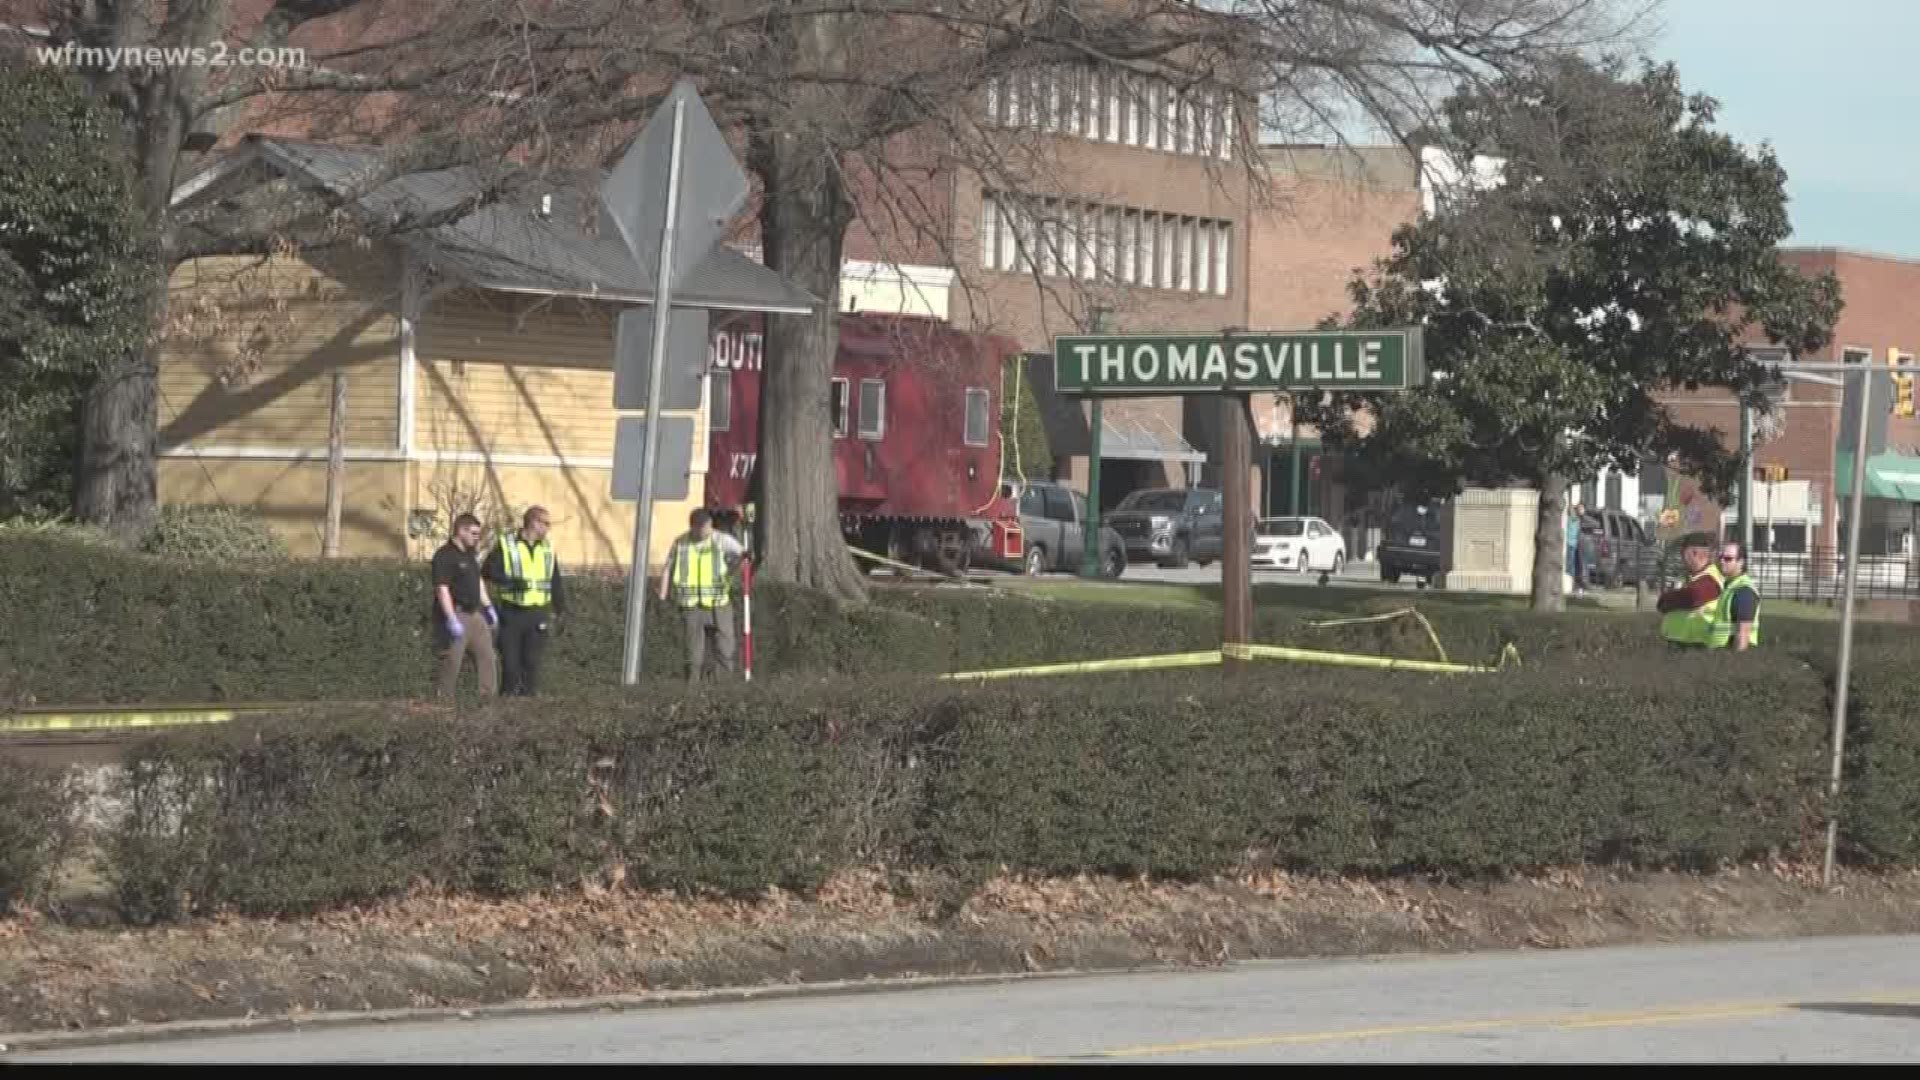 Thomasville police say a pedestrian hit by a train has died.